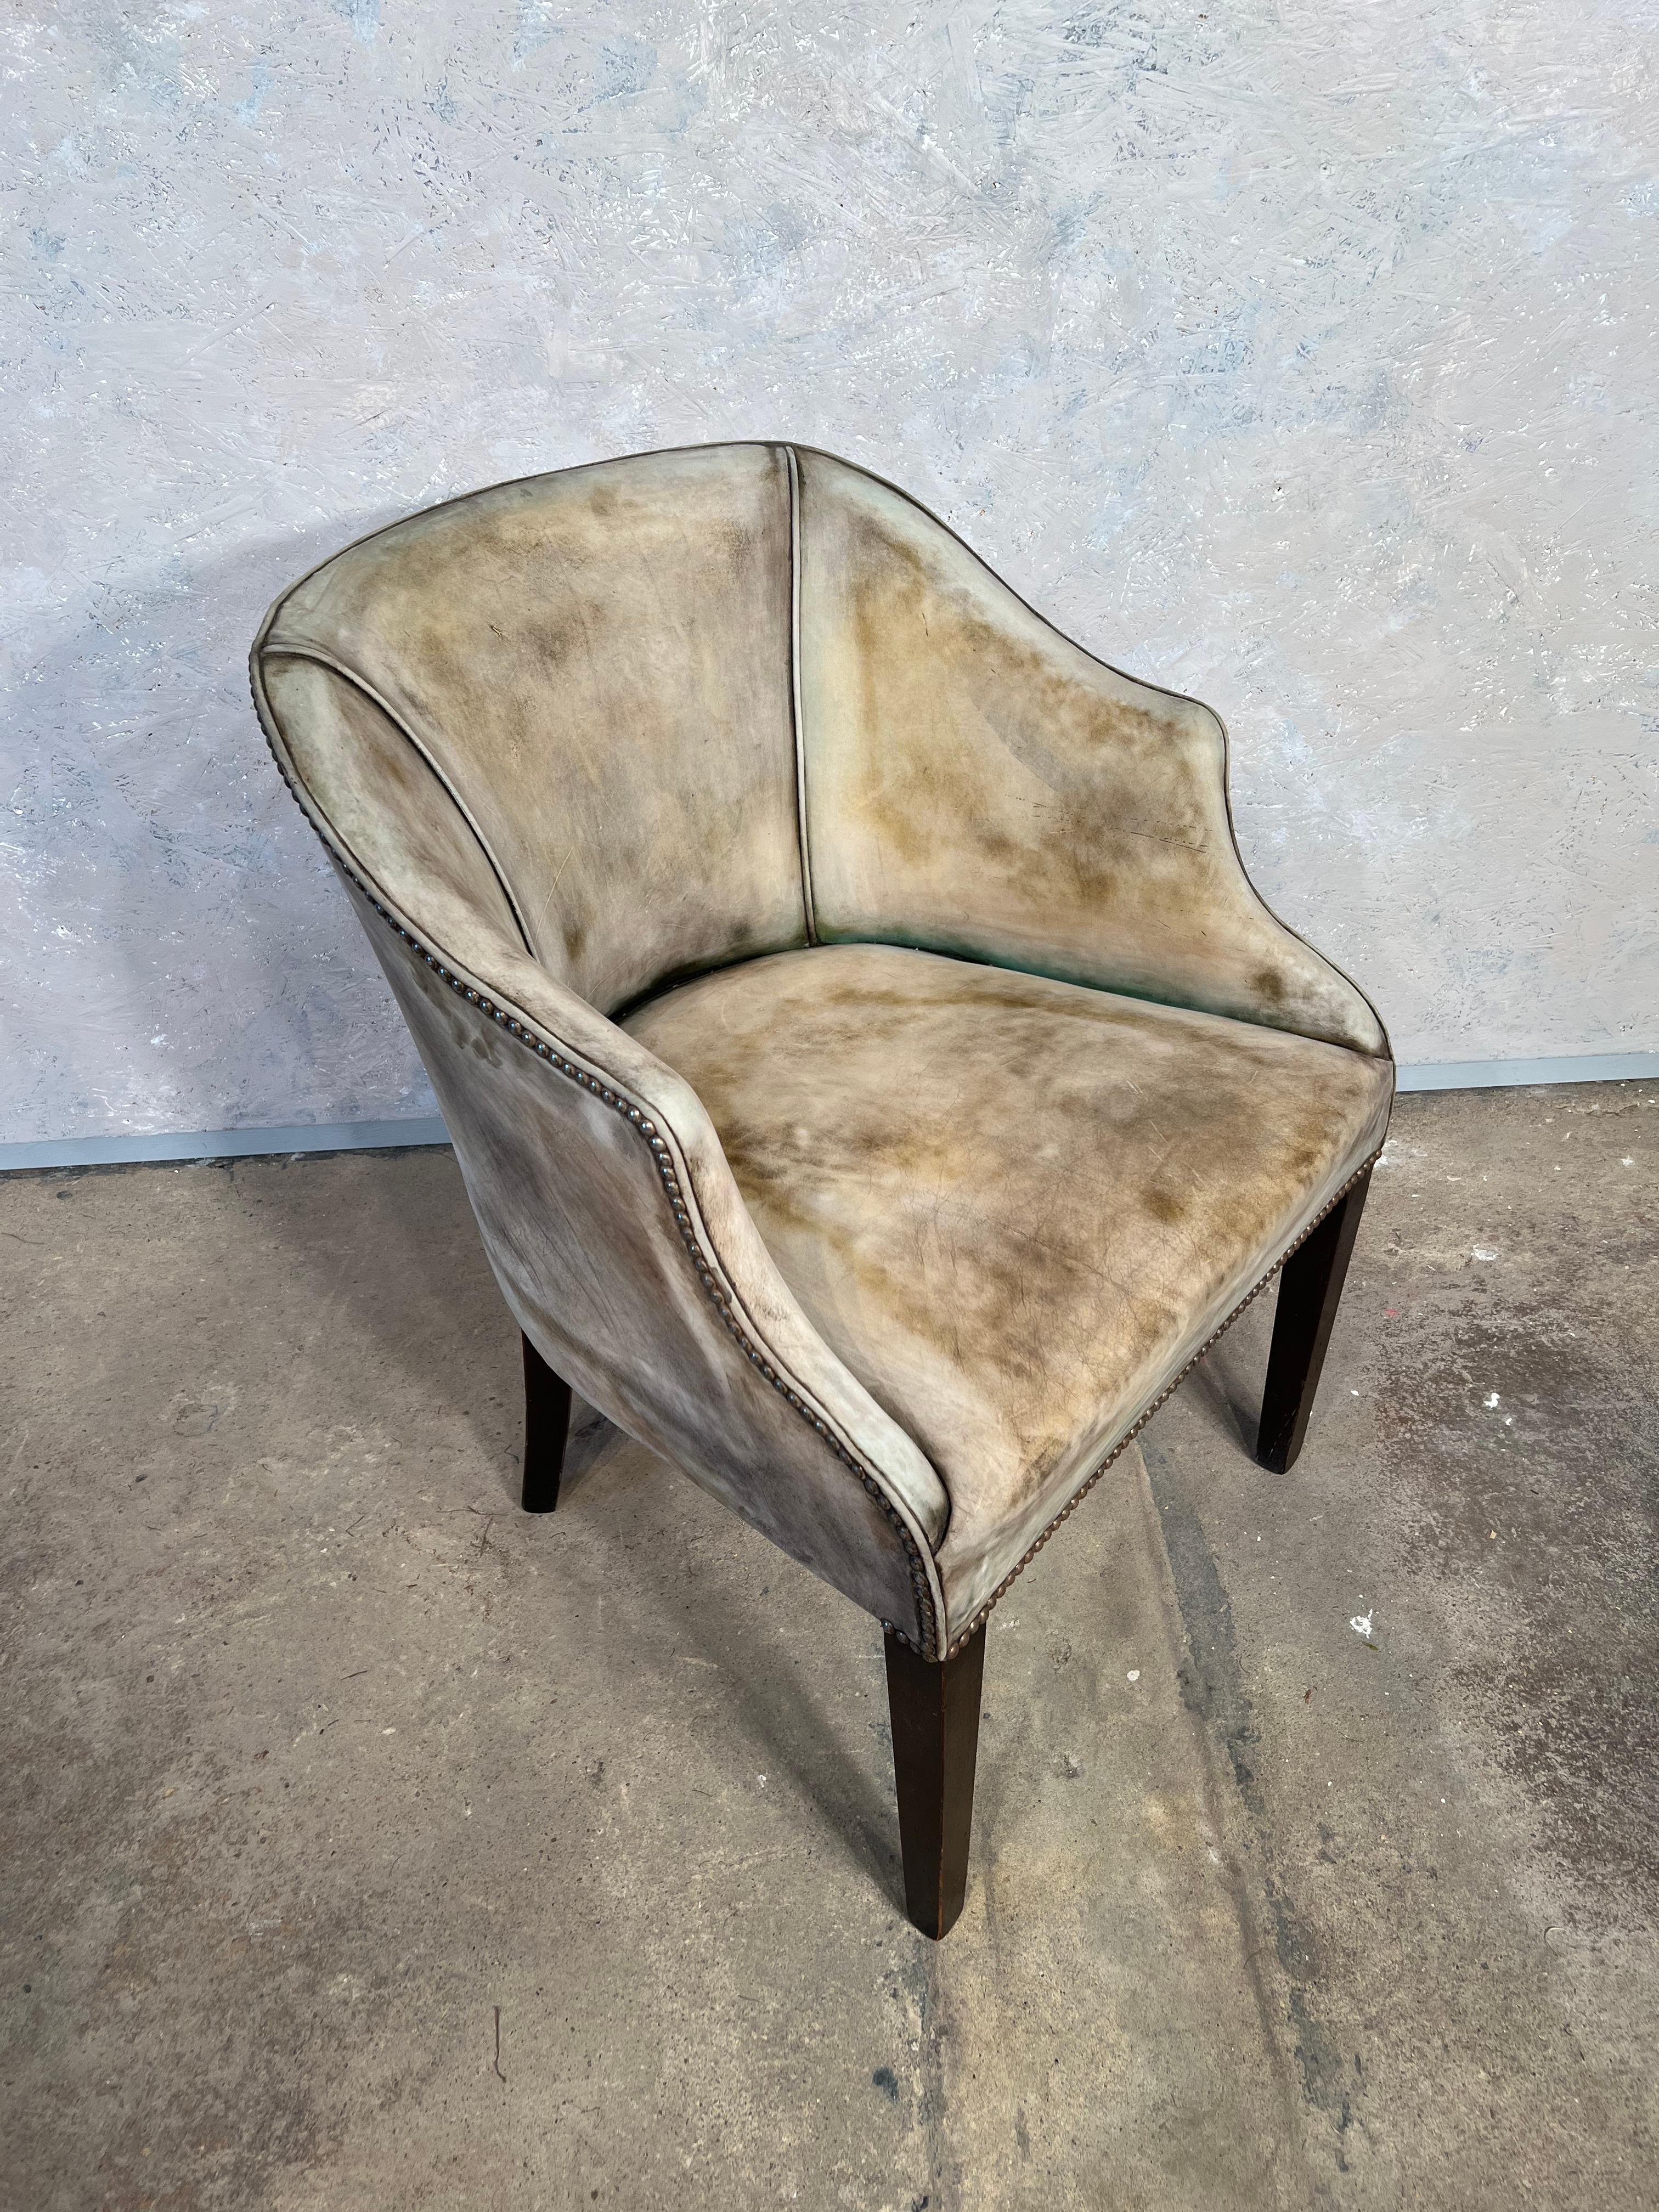 An English mid-century faded Green leather chair, lovely proportions, sits very elegantly on long mahogany legs.

Has a aged faded green dry look

In great condition.

 